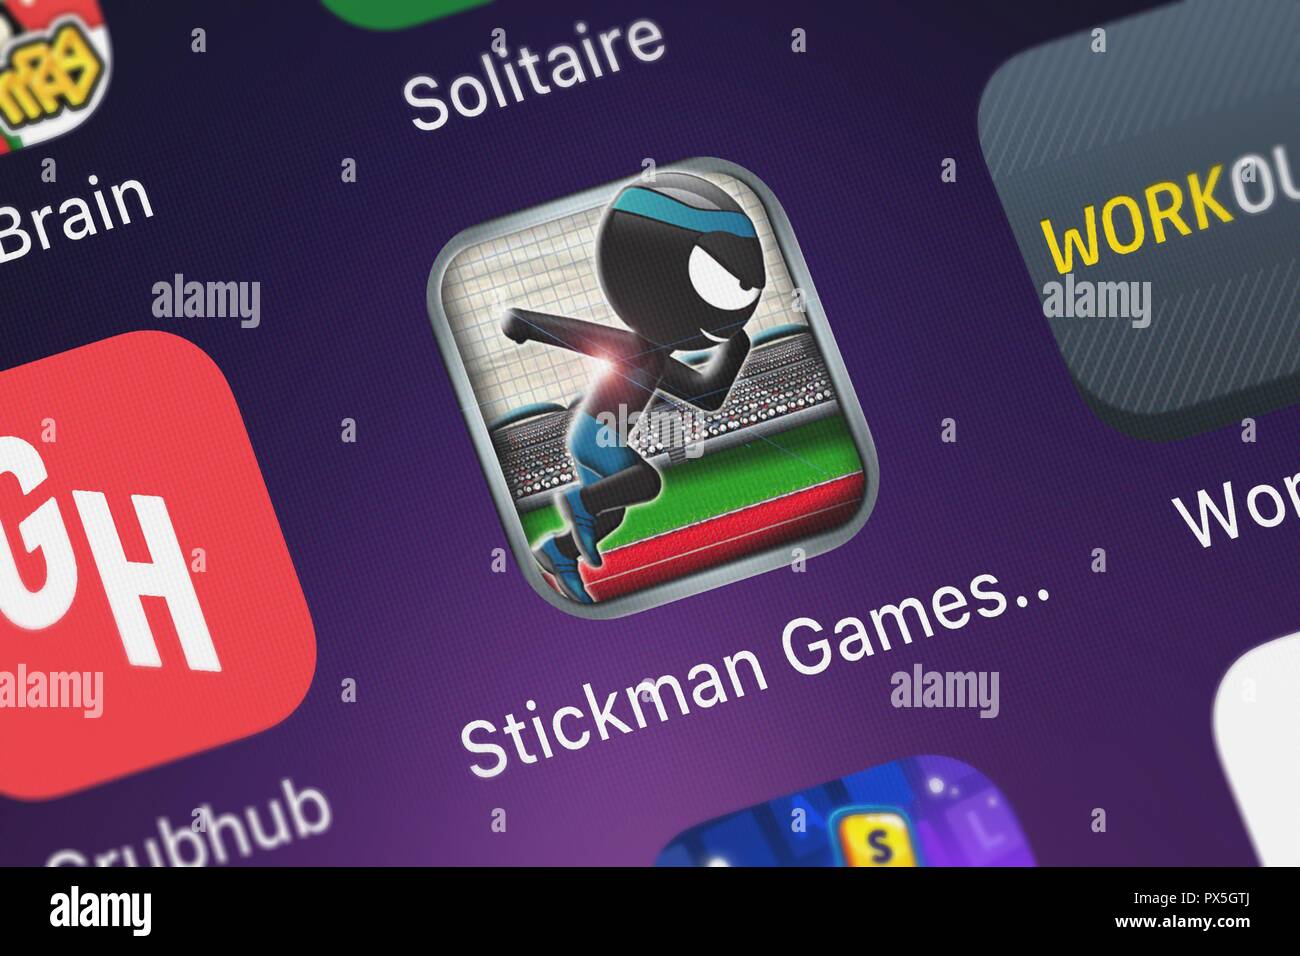 Play Stickman Games Online on PC & Mobile (FREE)